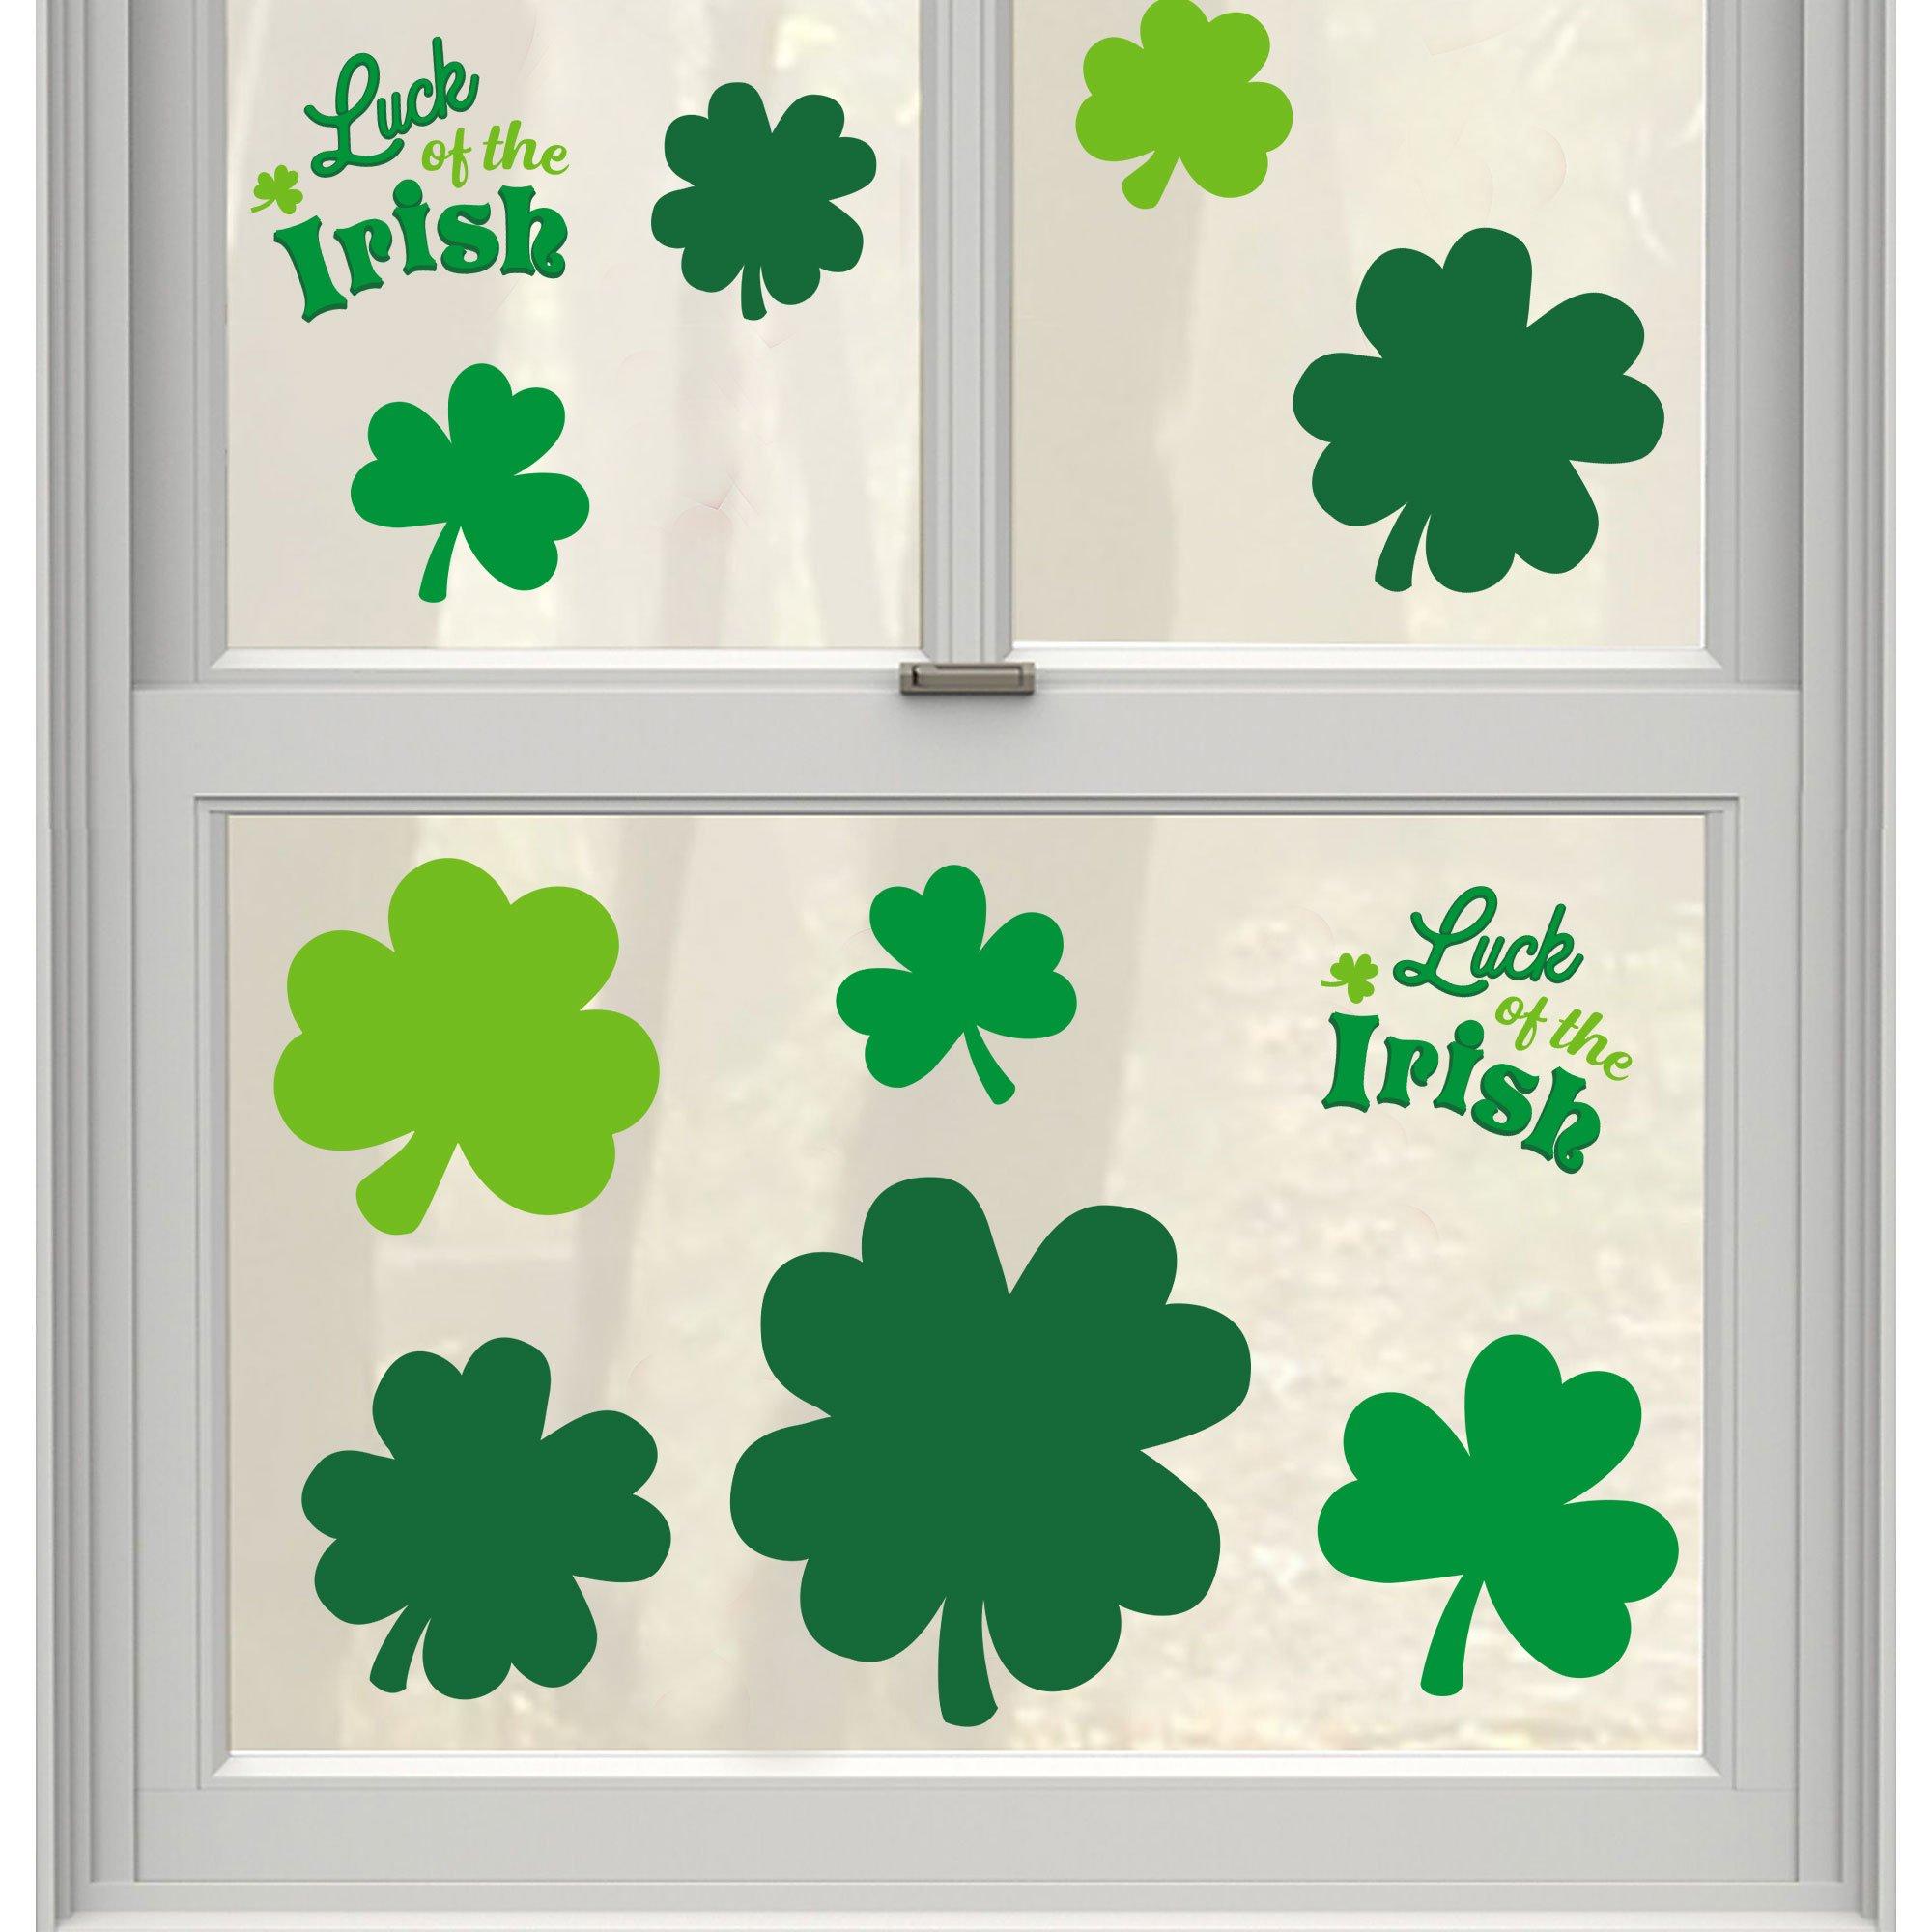 St. Patrick's Day Wishing You Good Luck' Sticker | Spreadshirt